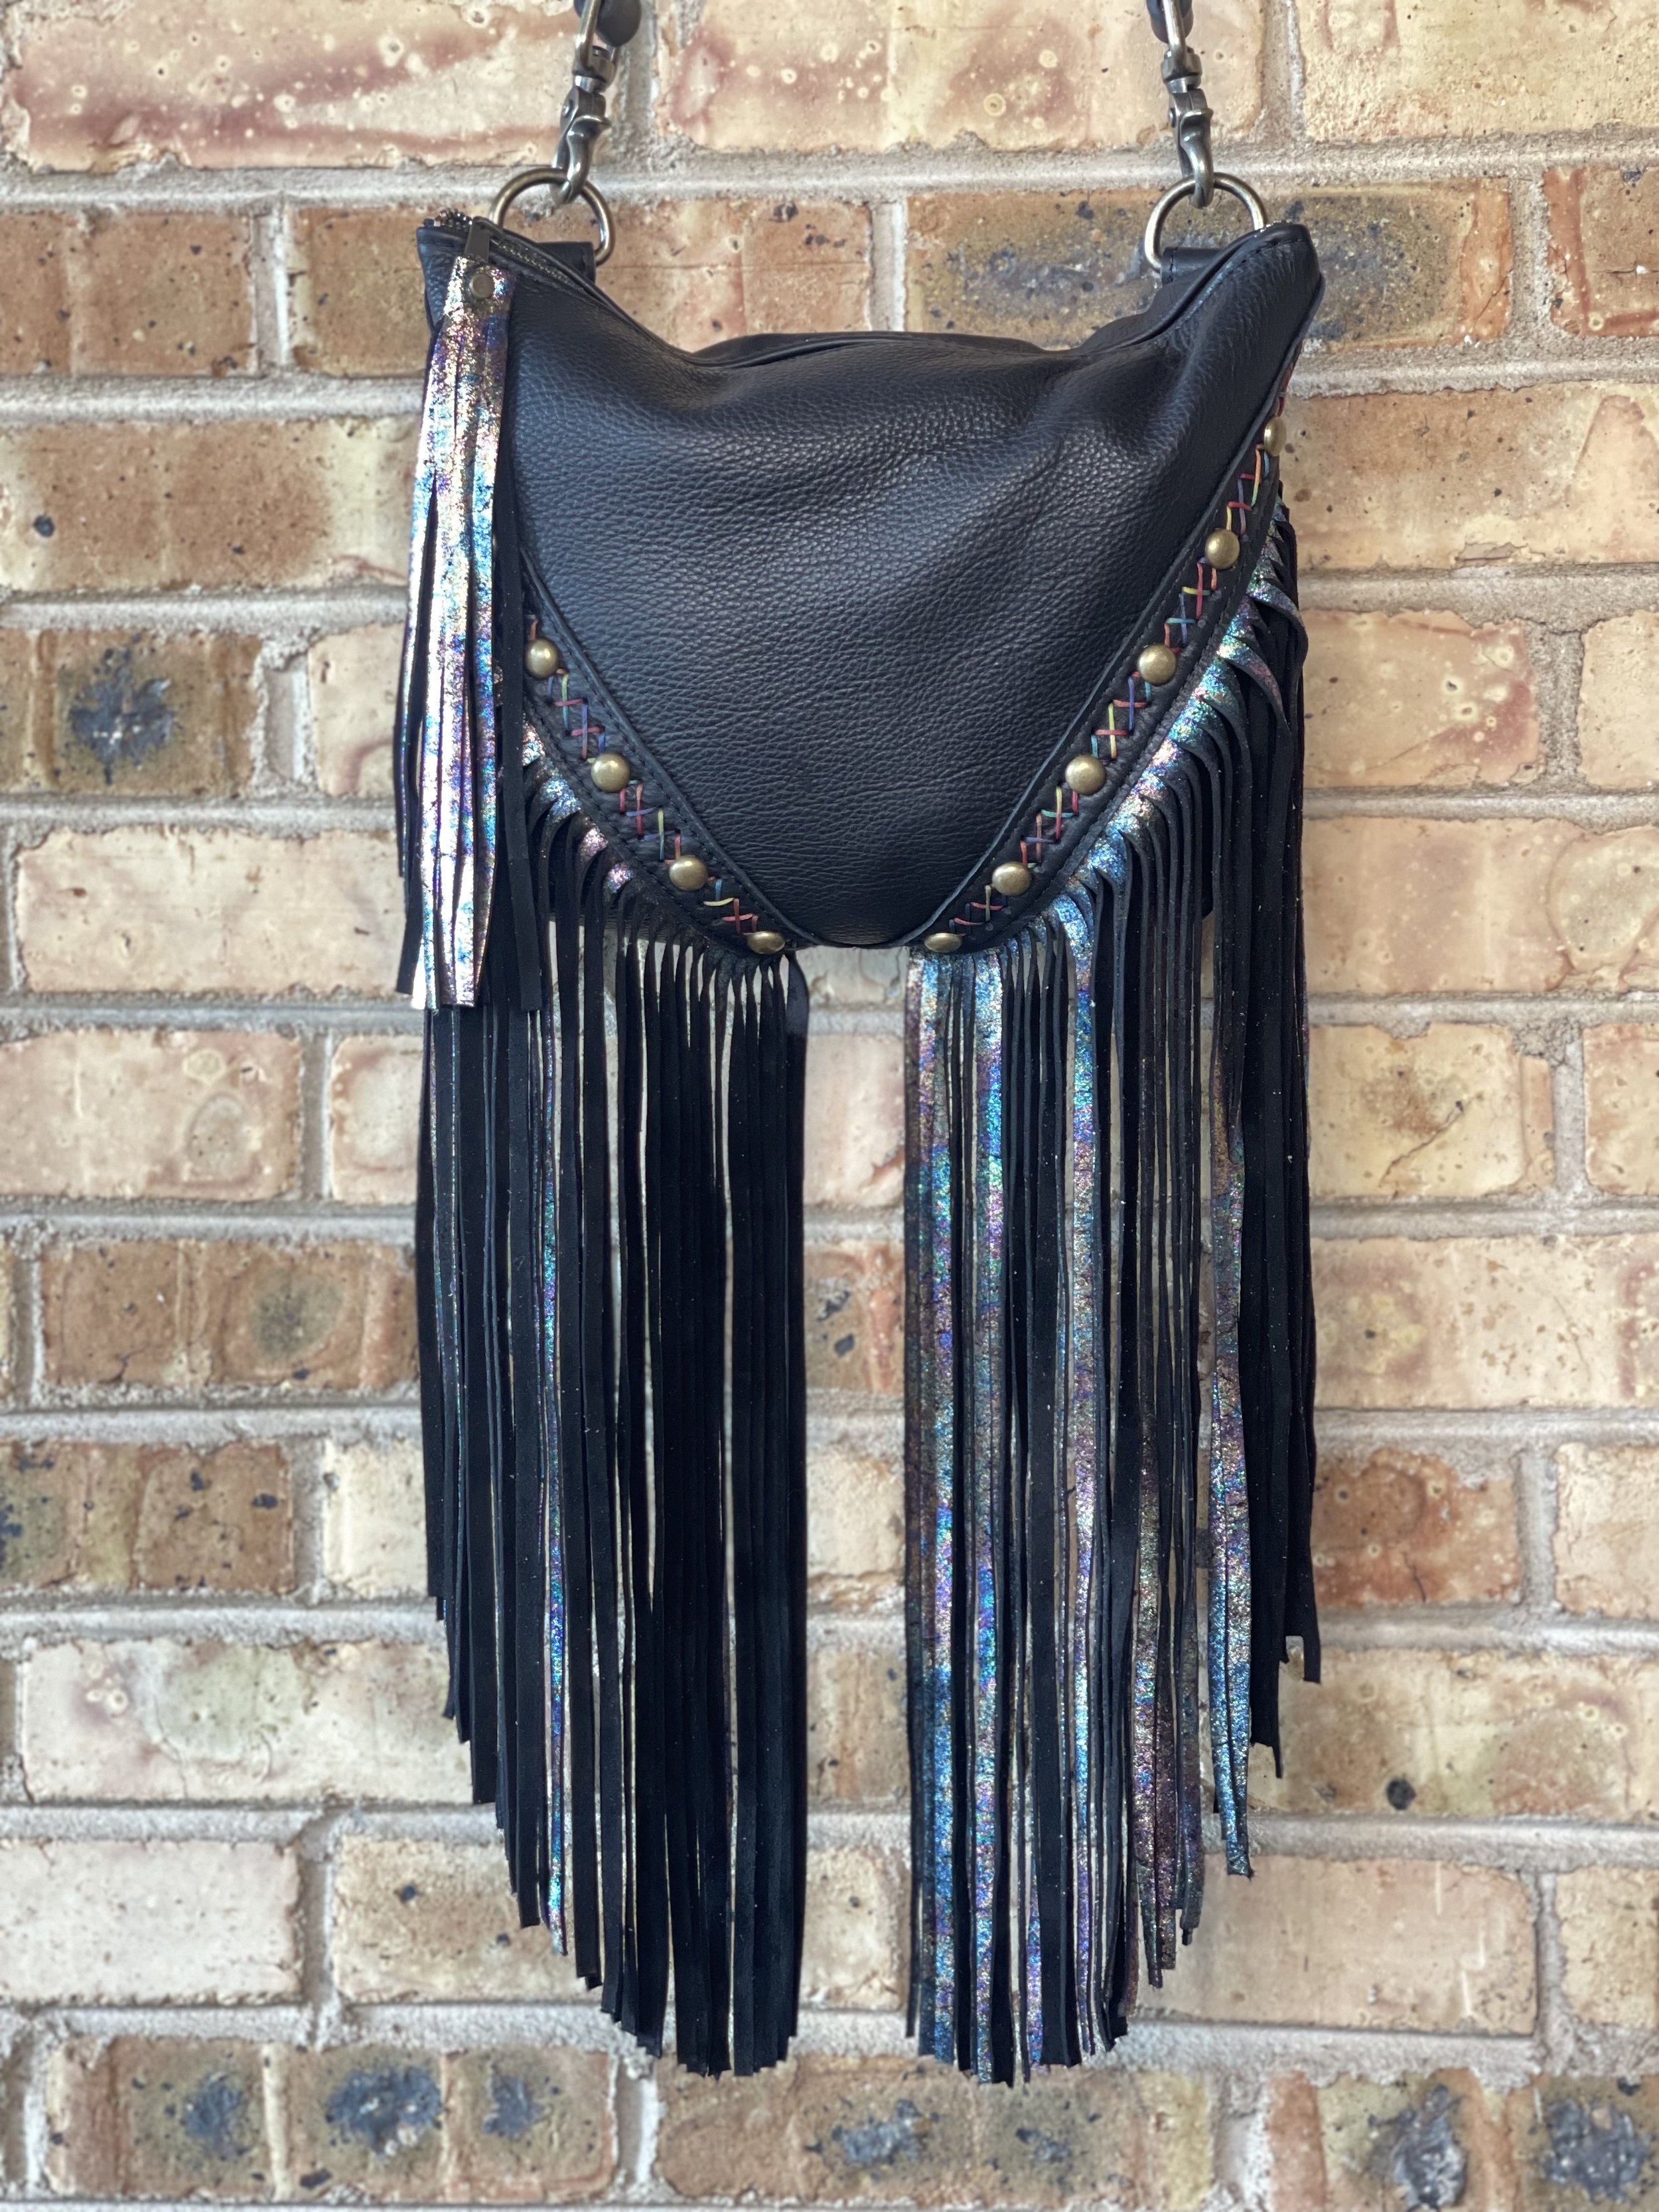 XL Radley Convertible Bag in Black Bison, *custom requested extra long* Antique Marble Fringe, Rainbow Criss Cross Handstitching, and Studs